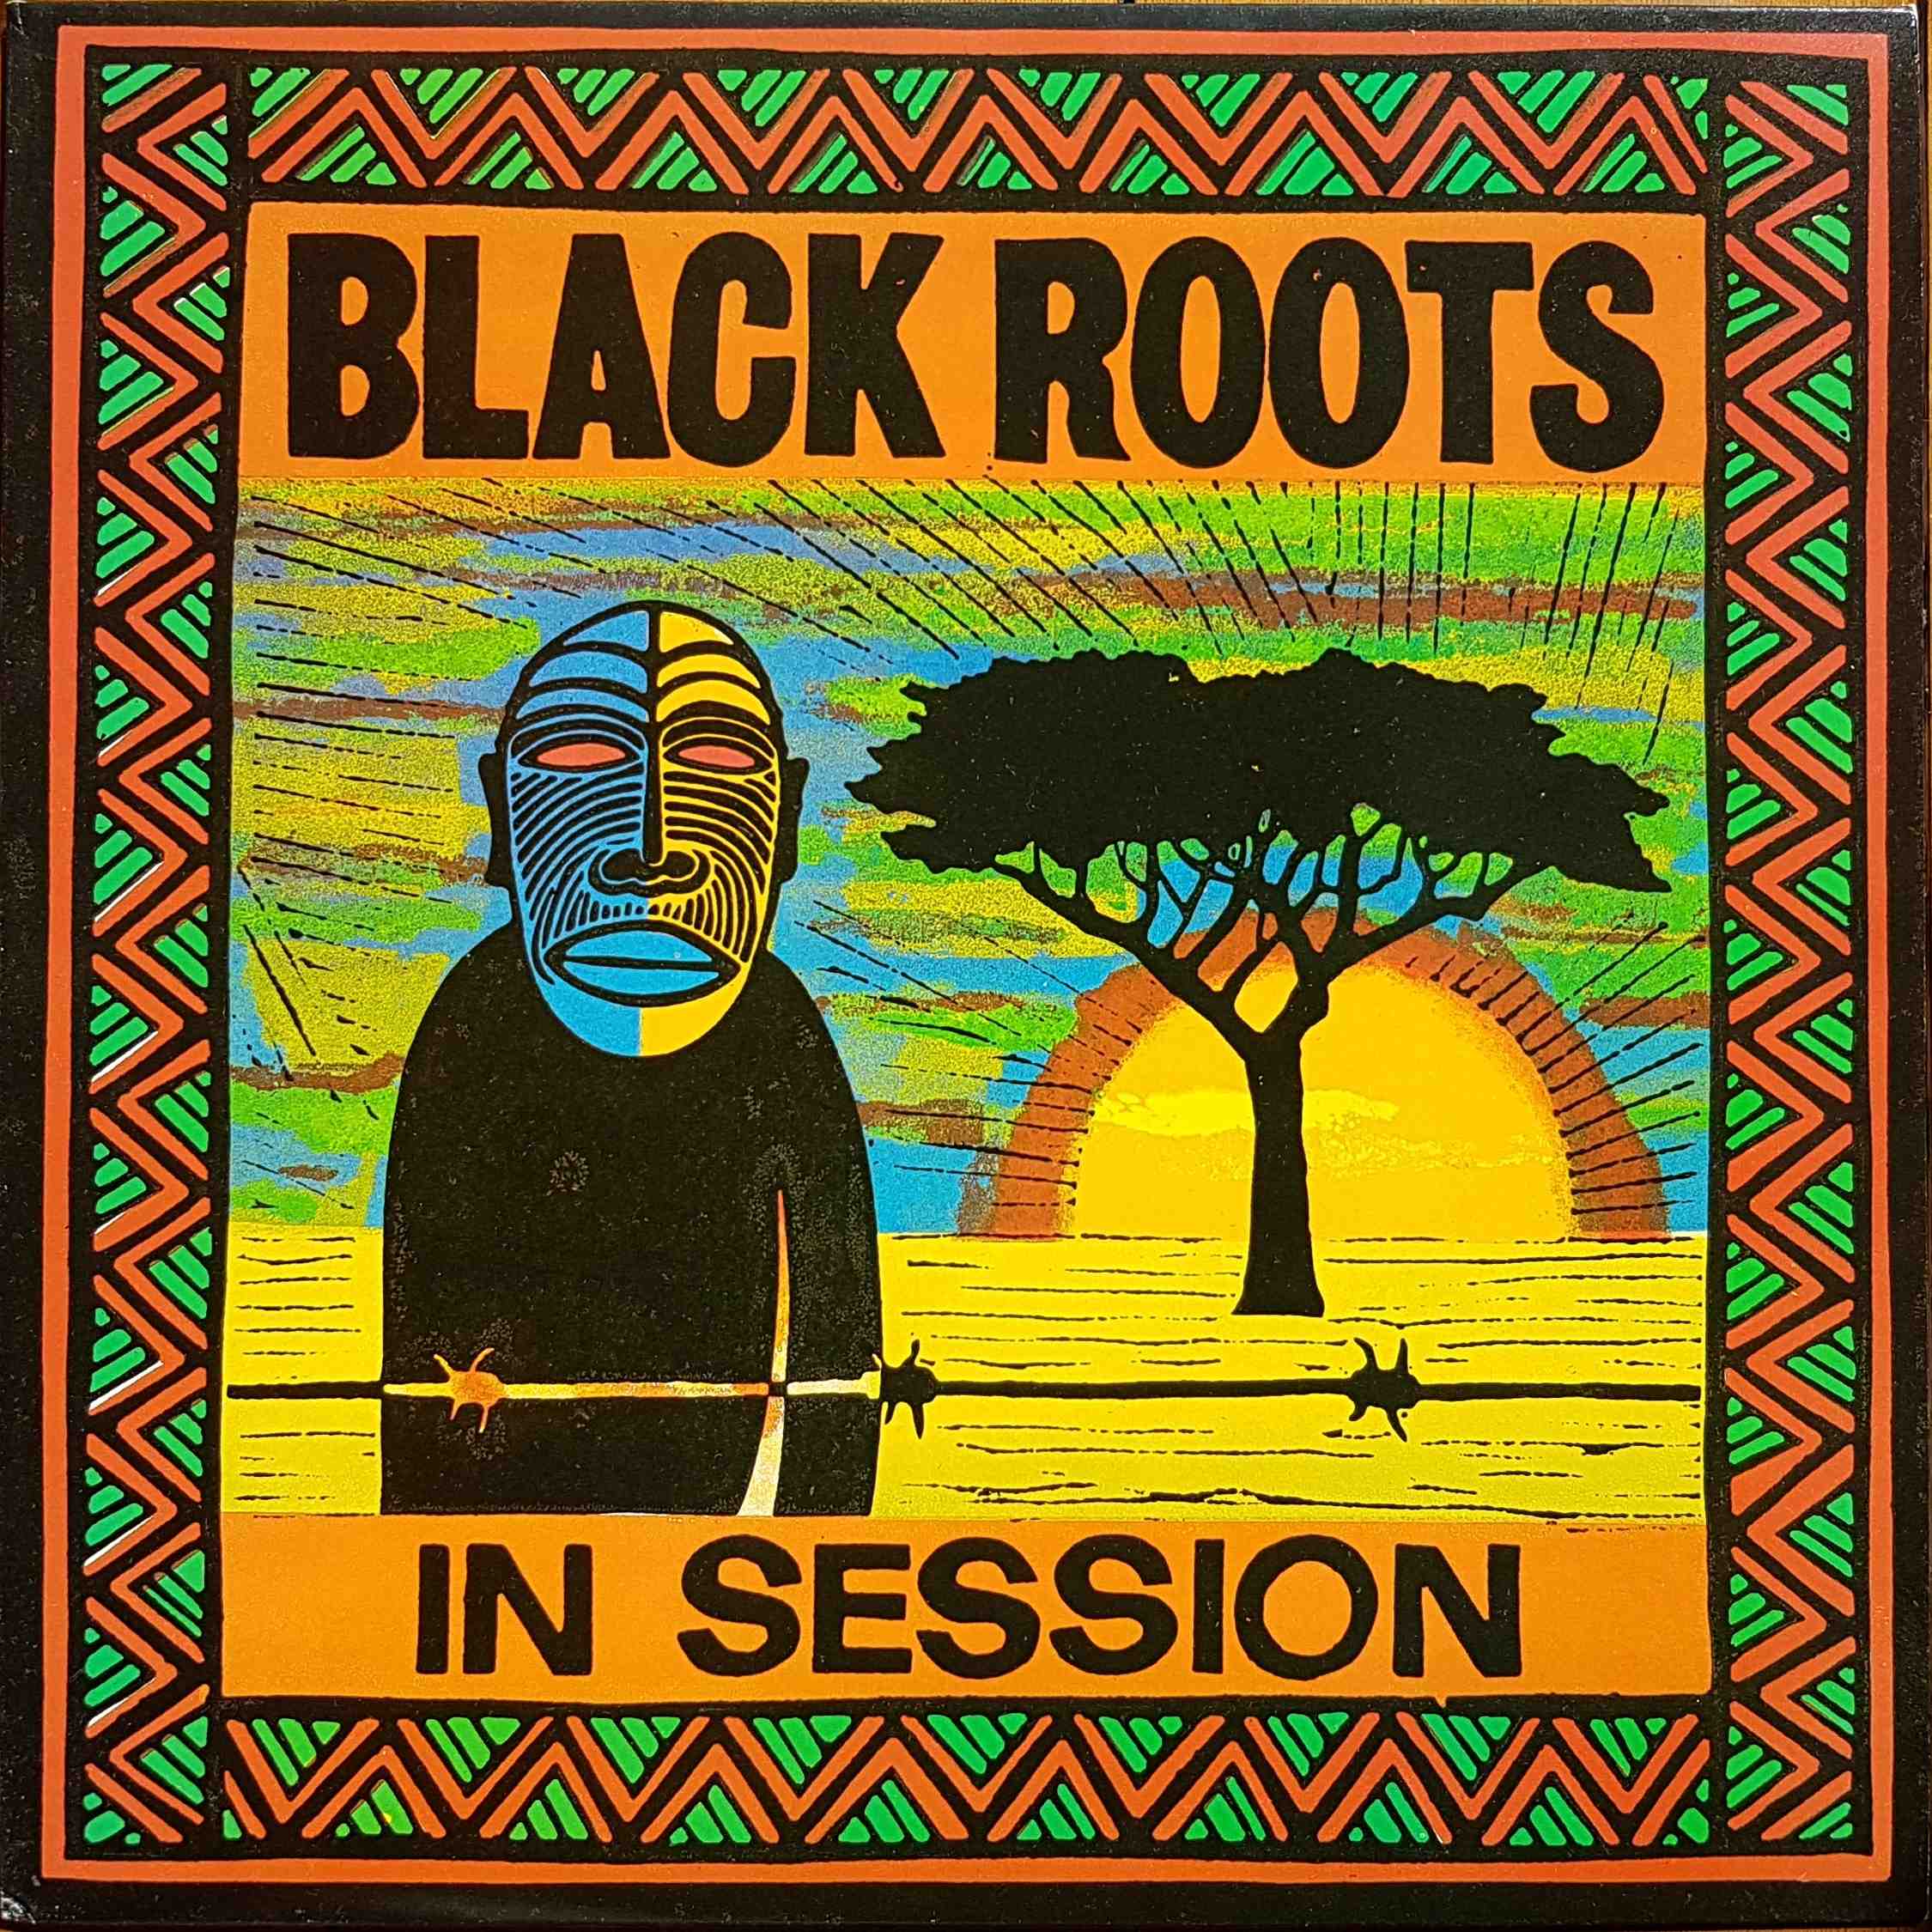 Picture of REC 570 In session by artist Black Roots from the BBC albums - Records and Tapes library